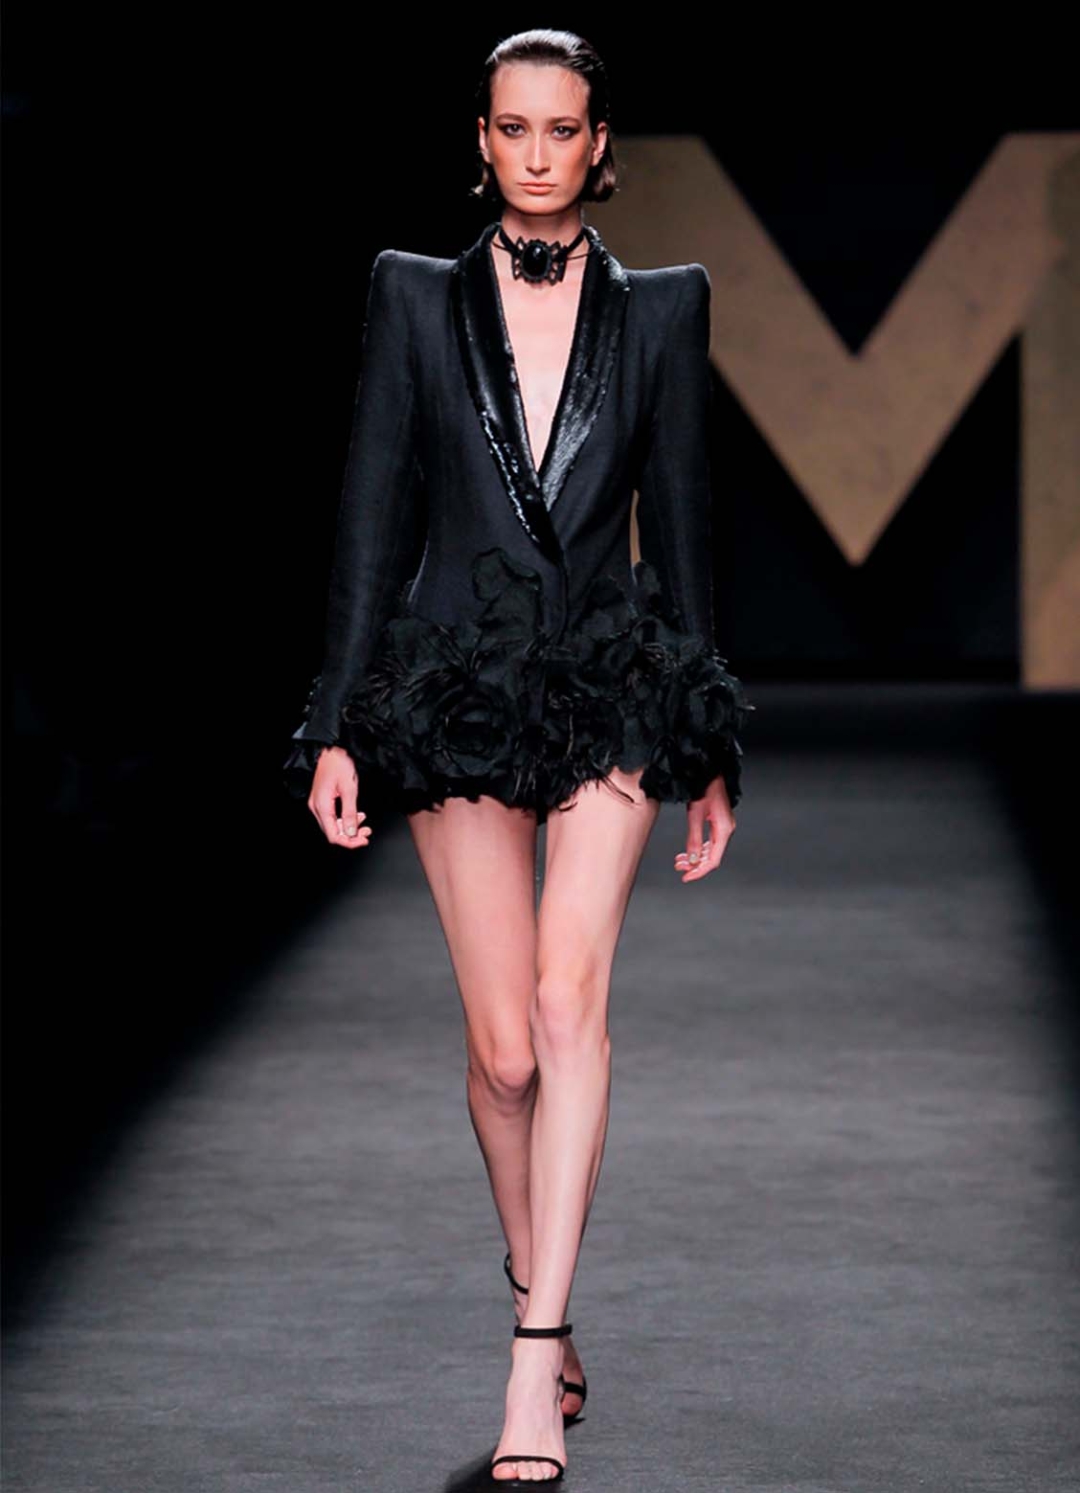 Design belonging to the ‘Exceso’ collection, presented by MALNE at the 74th MBFWM